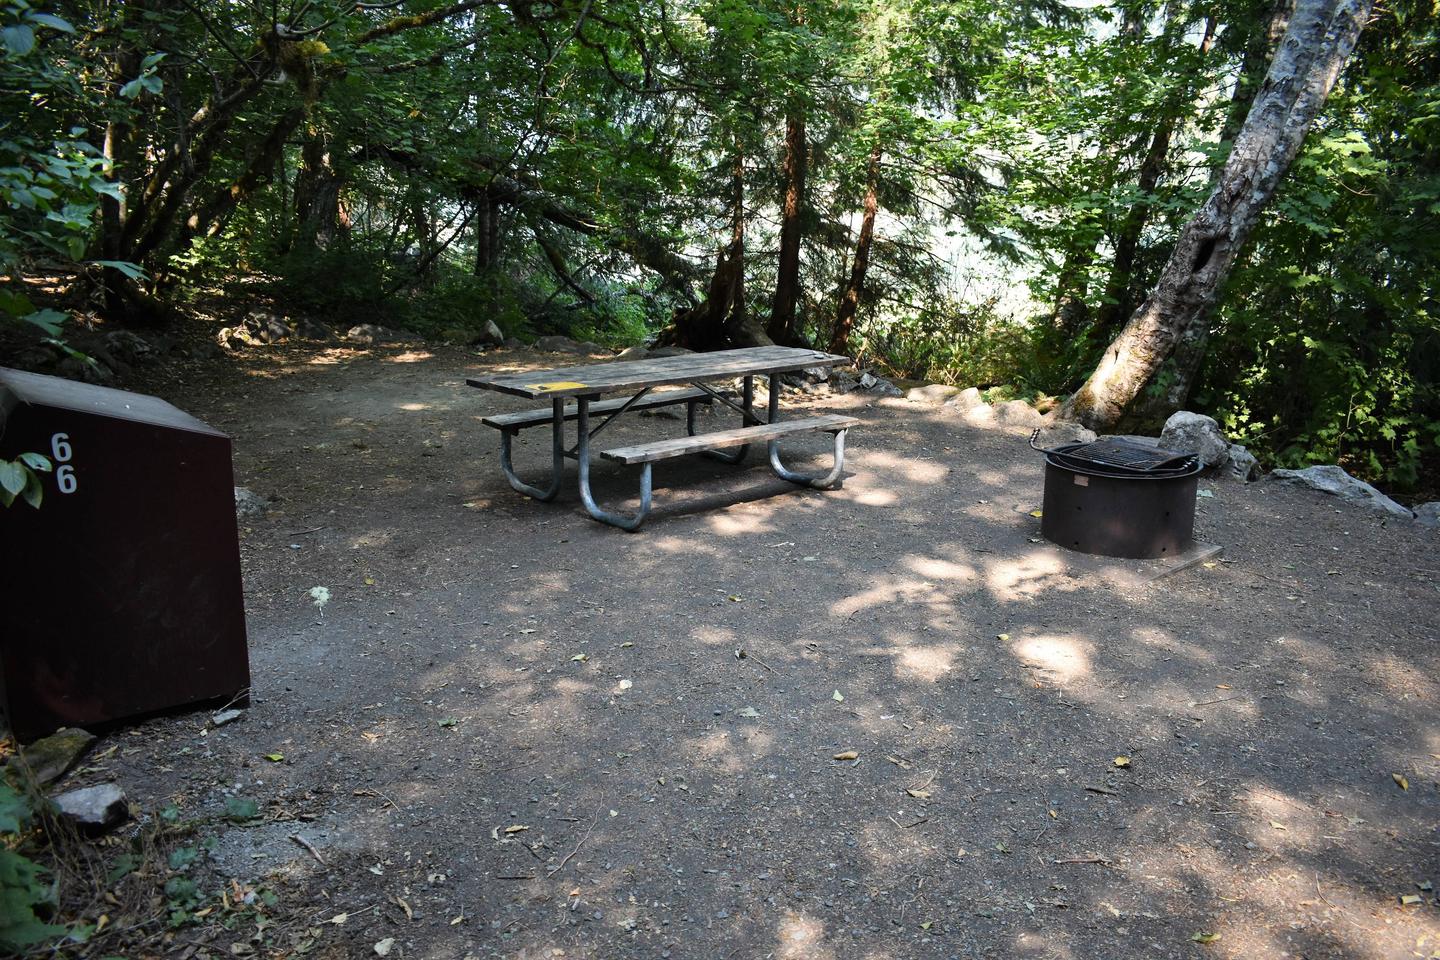 Food storage locker, picnic table, and fire ringView of campsite